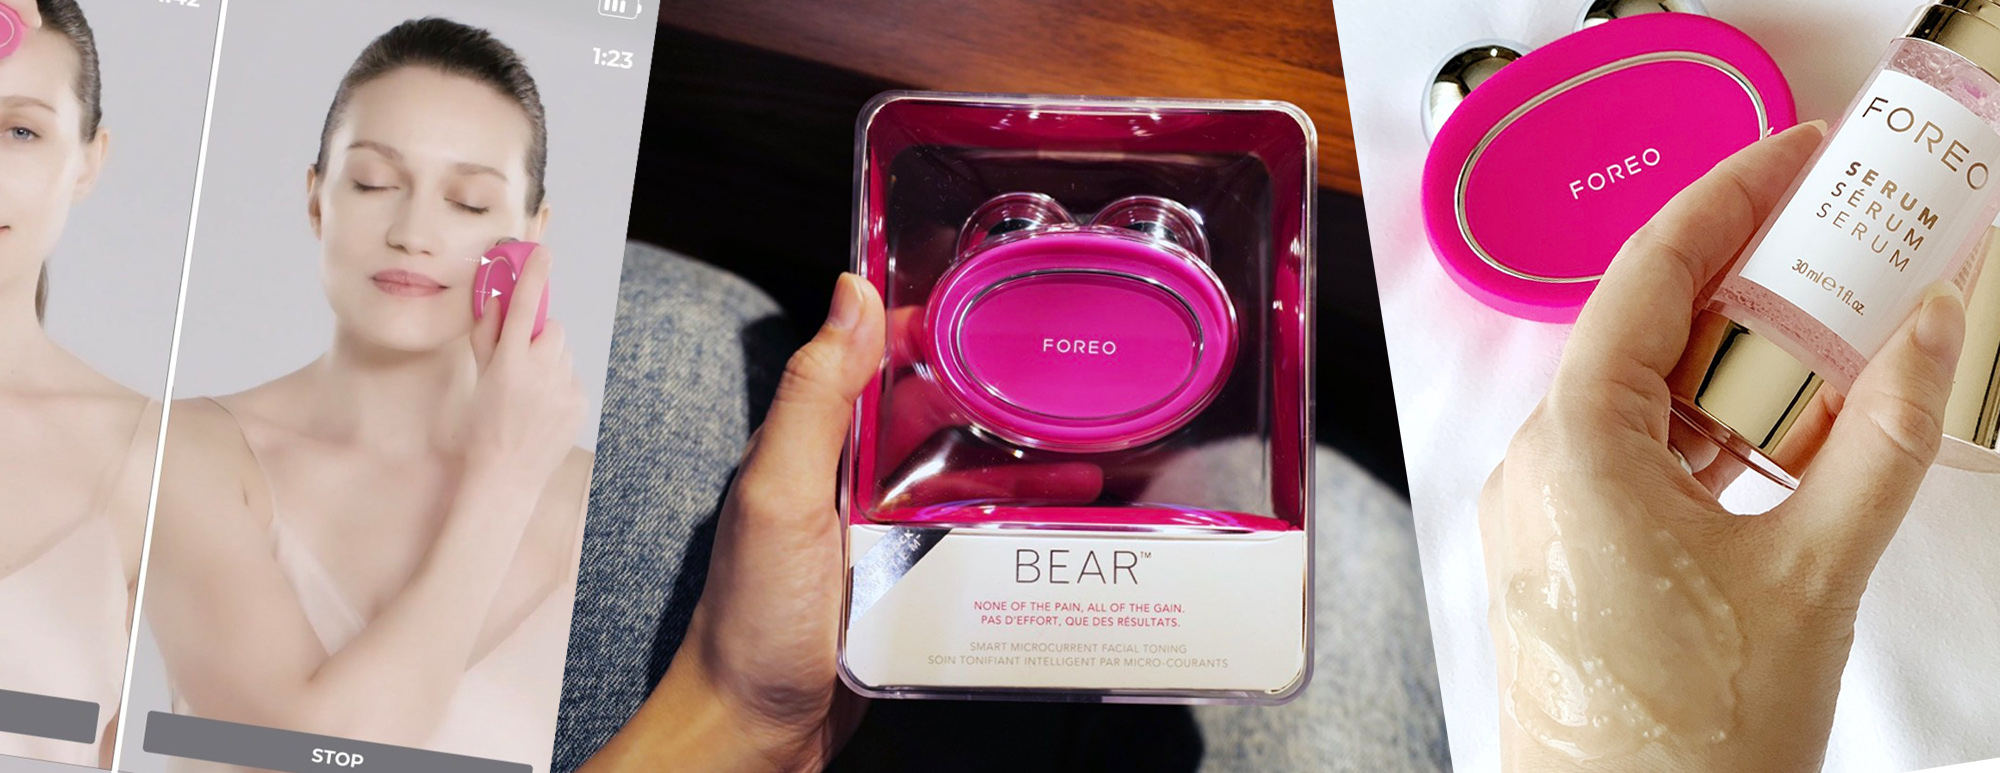 Review: BEAR by FOREO Sweden That Uses Microcurrents To Tone And